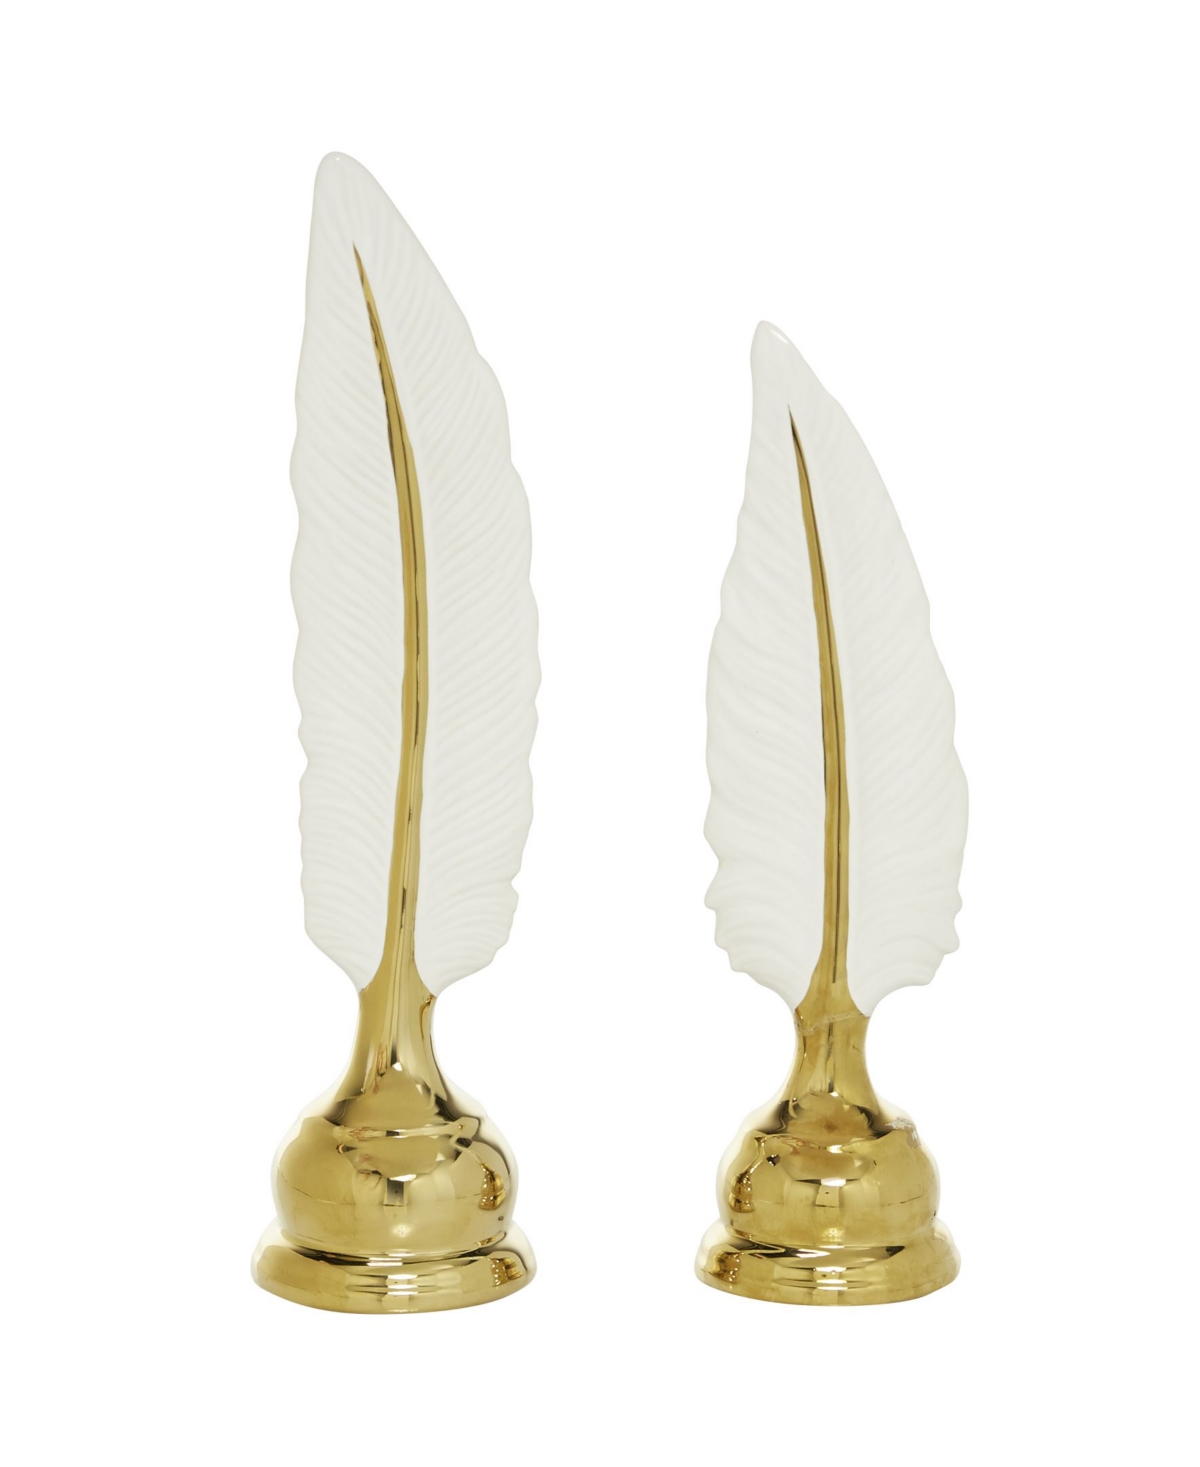 Cosmoliving By Cosmopolitan Glam Birds Sculpture, Set Of 2 In Gold-tone